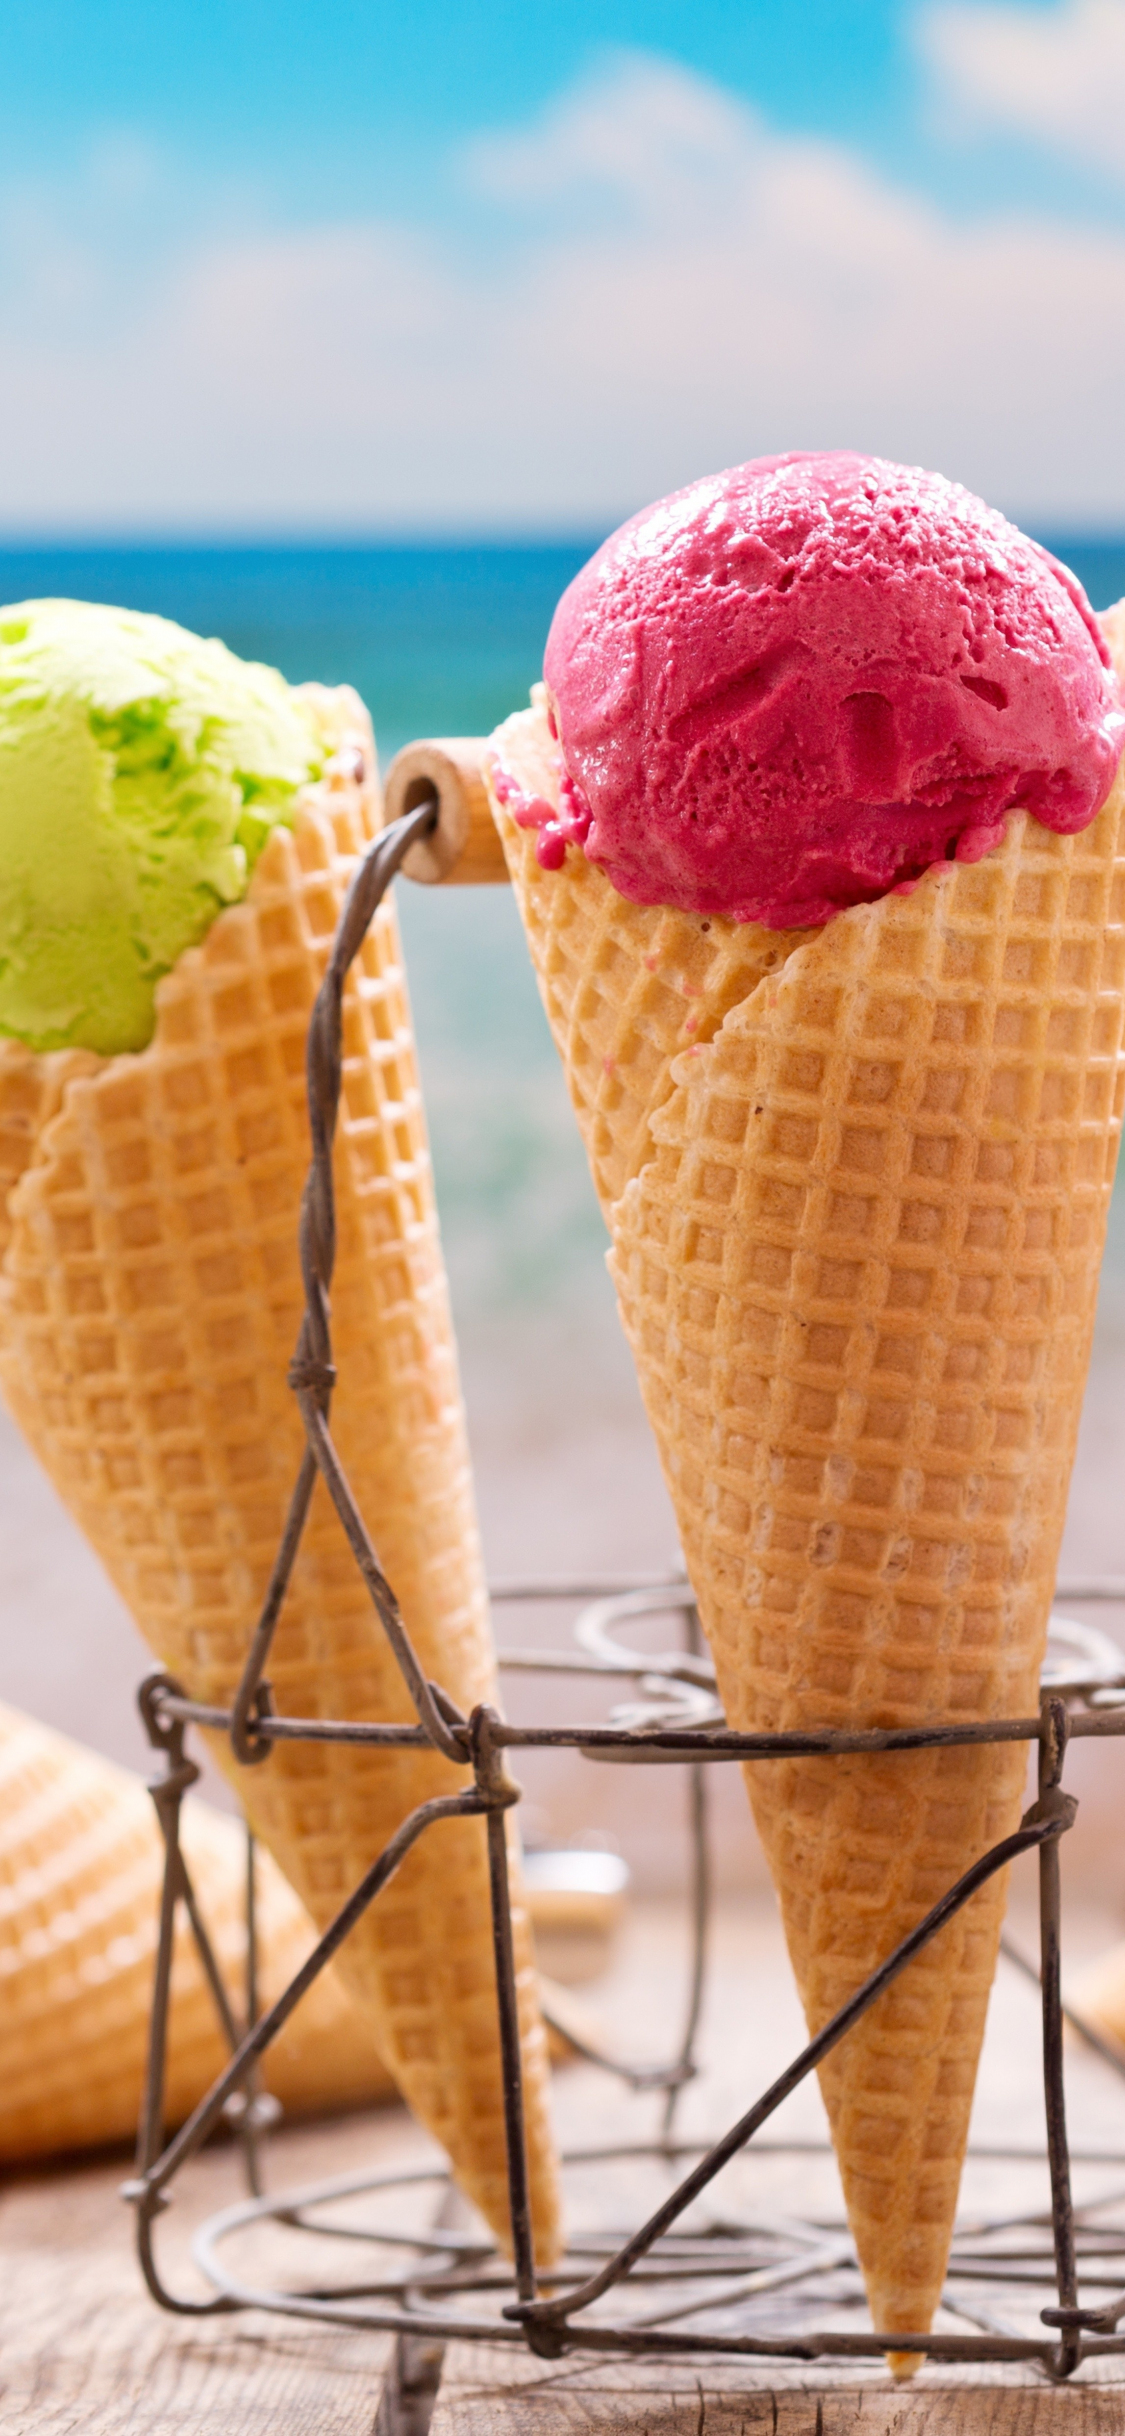 Download 1125x2436 wallpaper ice cream, waffle cones, summer, iphone x 1125x2436 hd image, background, 5114